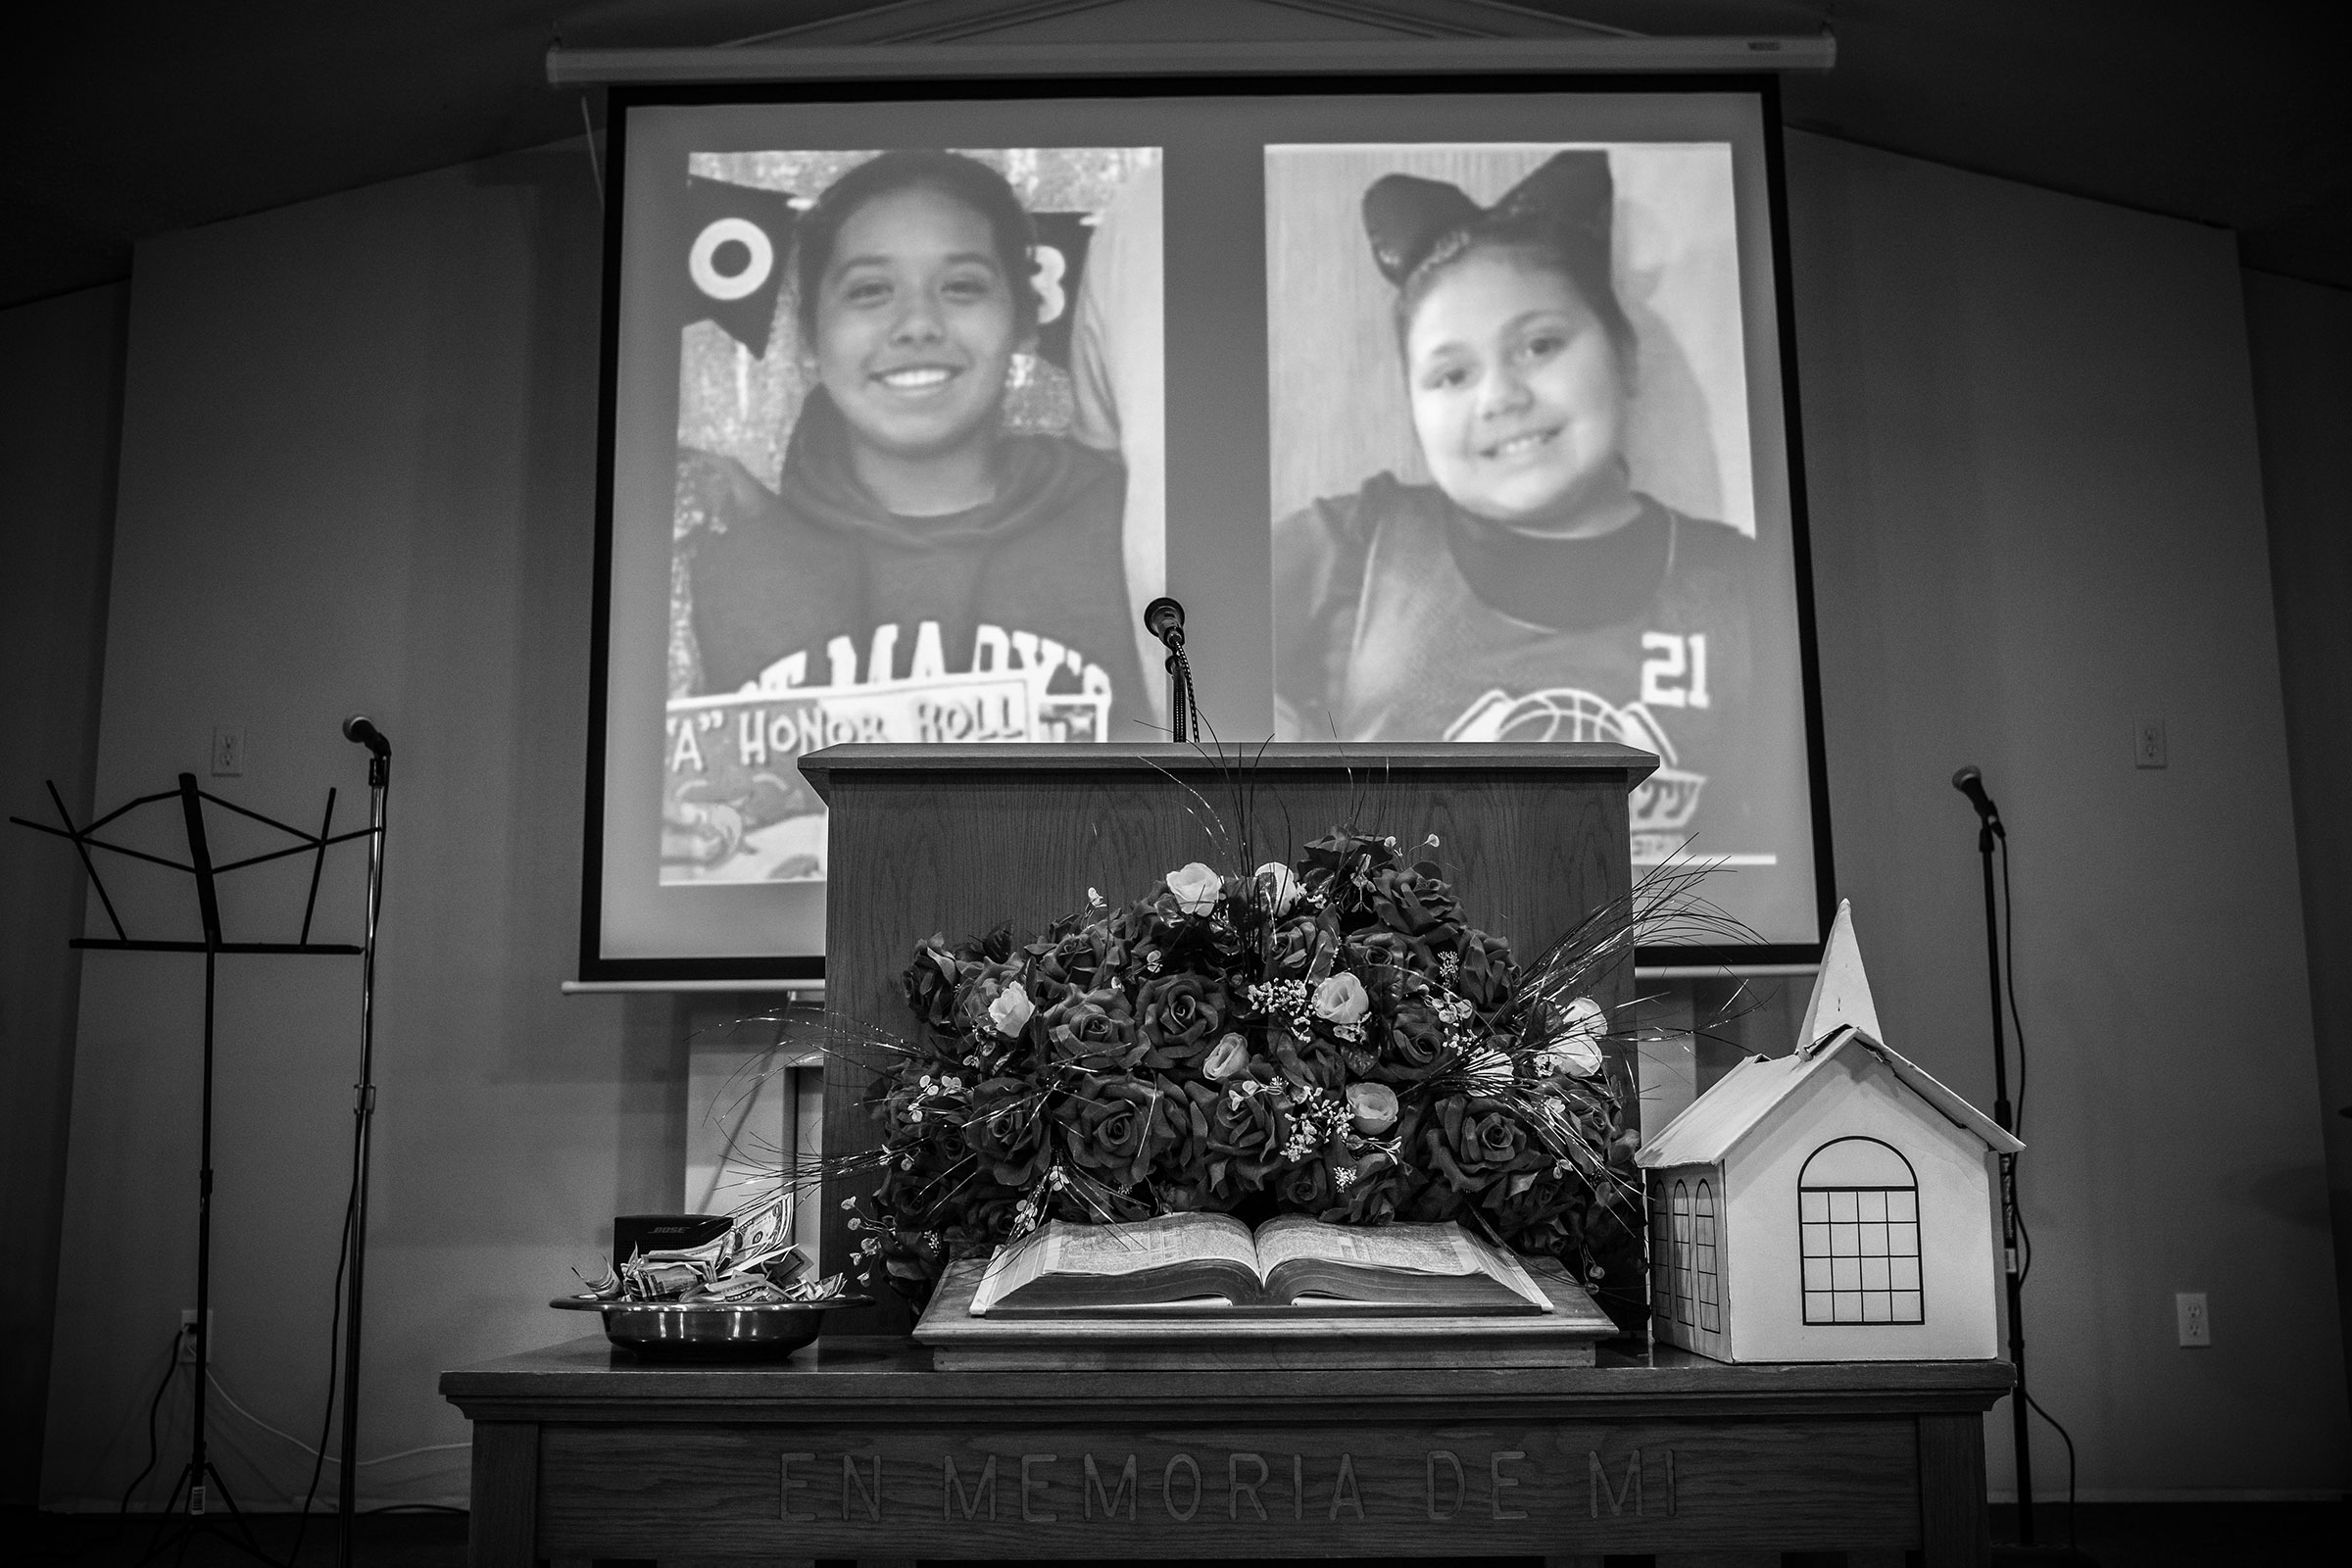 The photographs of Lexi Rubio, left, and Eliahna Garcia, students at Robb Elementary school who were killed in the recent mass shooting are projected during a service at Iglesia Bautista church on May 29, 2022. (David Butow—Redux)